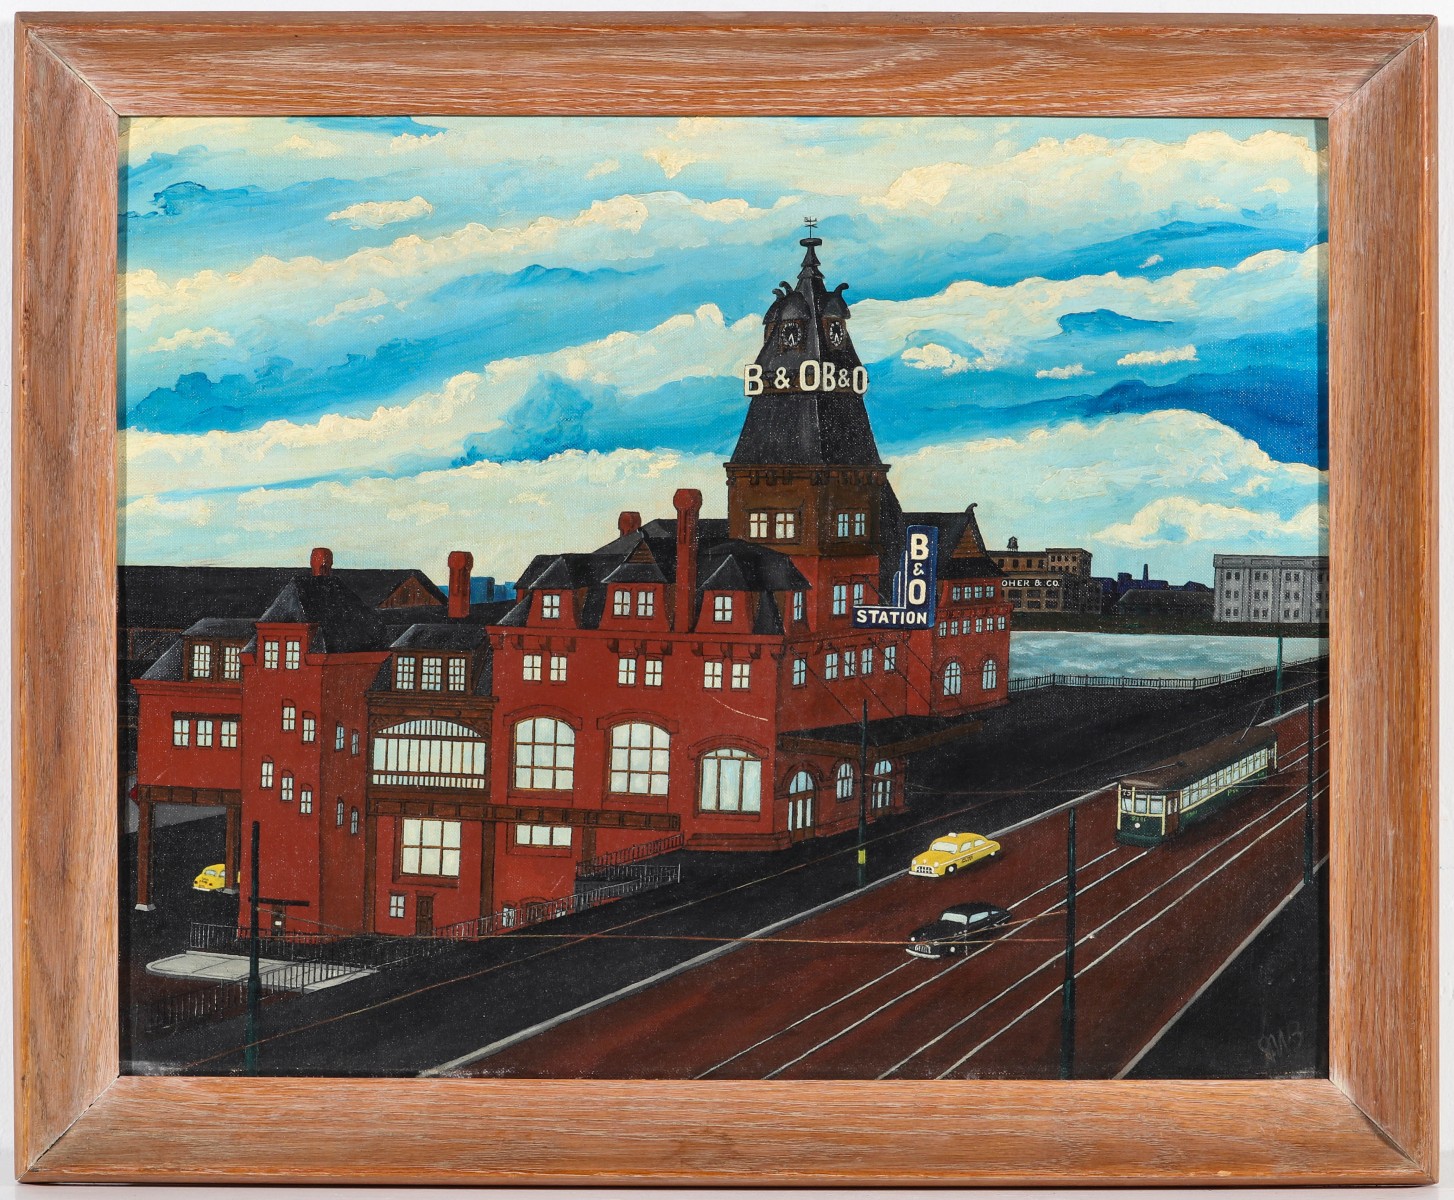 A CIRCA 1940s FOLK ART OIL PAINTING OF PHILLY B&O DEPOT